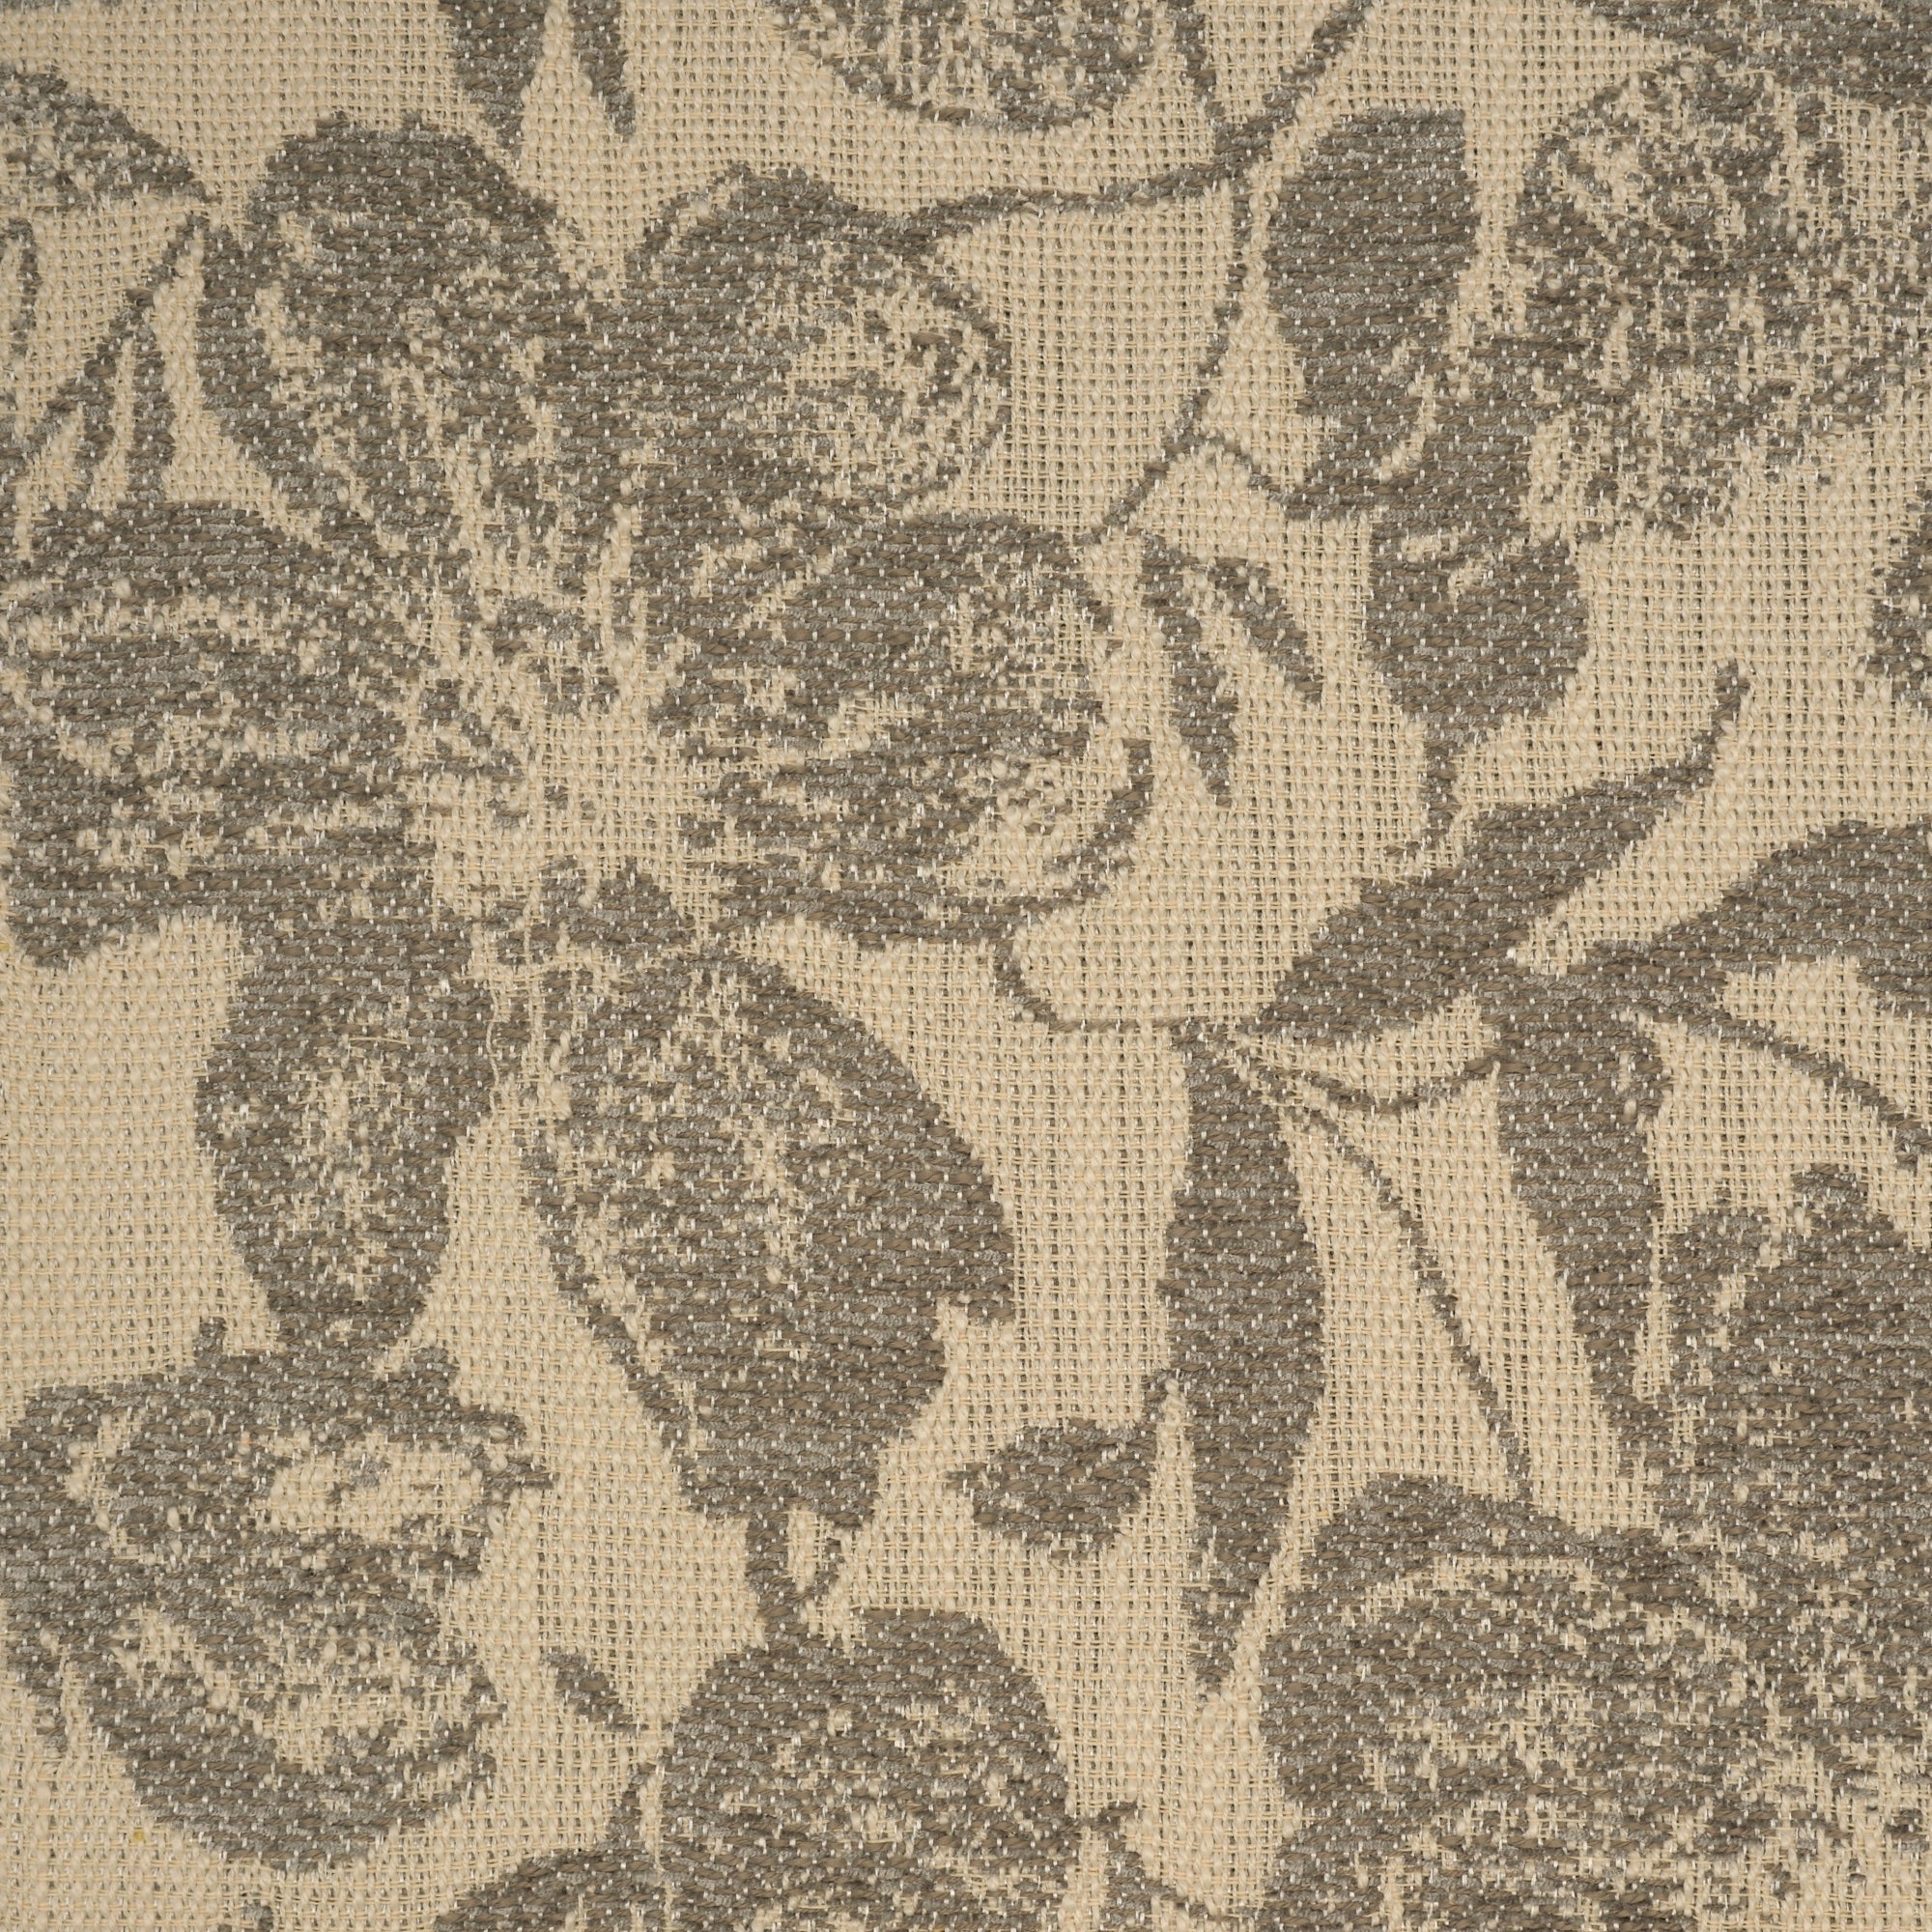 CAICOS - MODERN WOVEN TROPICAL PATTERN UPHOLSTERY FABRIC BY THE YARD